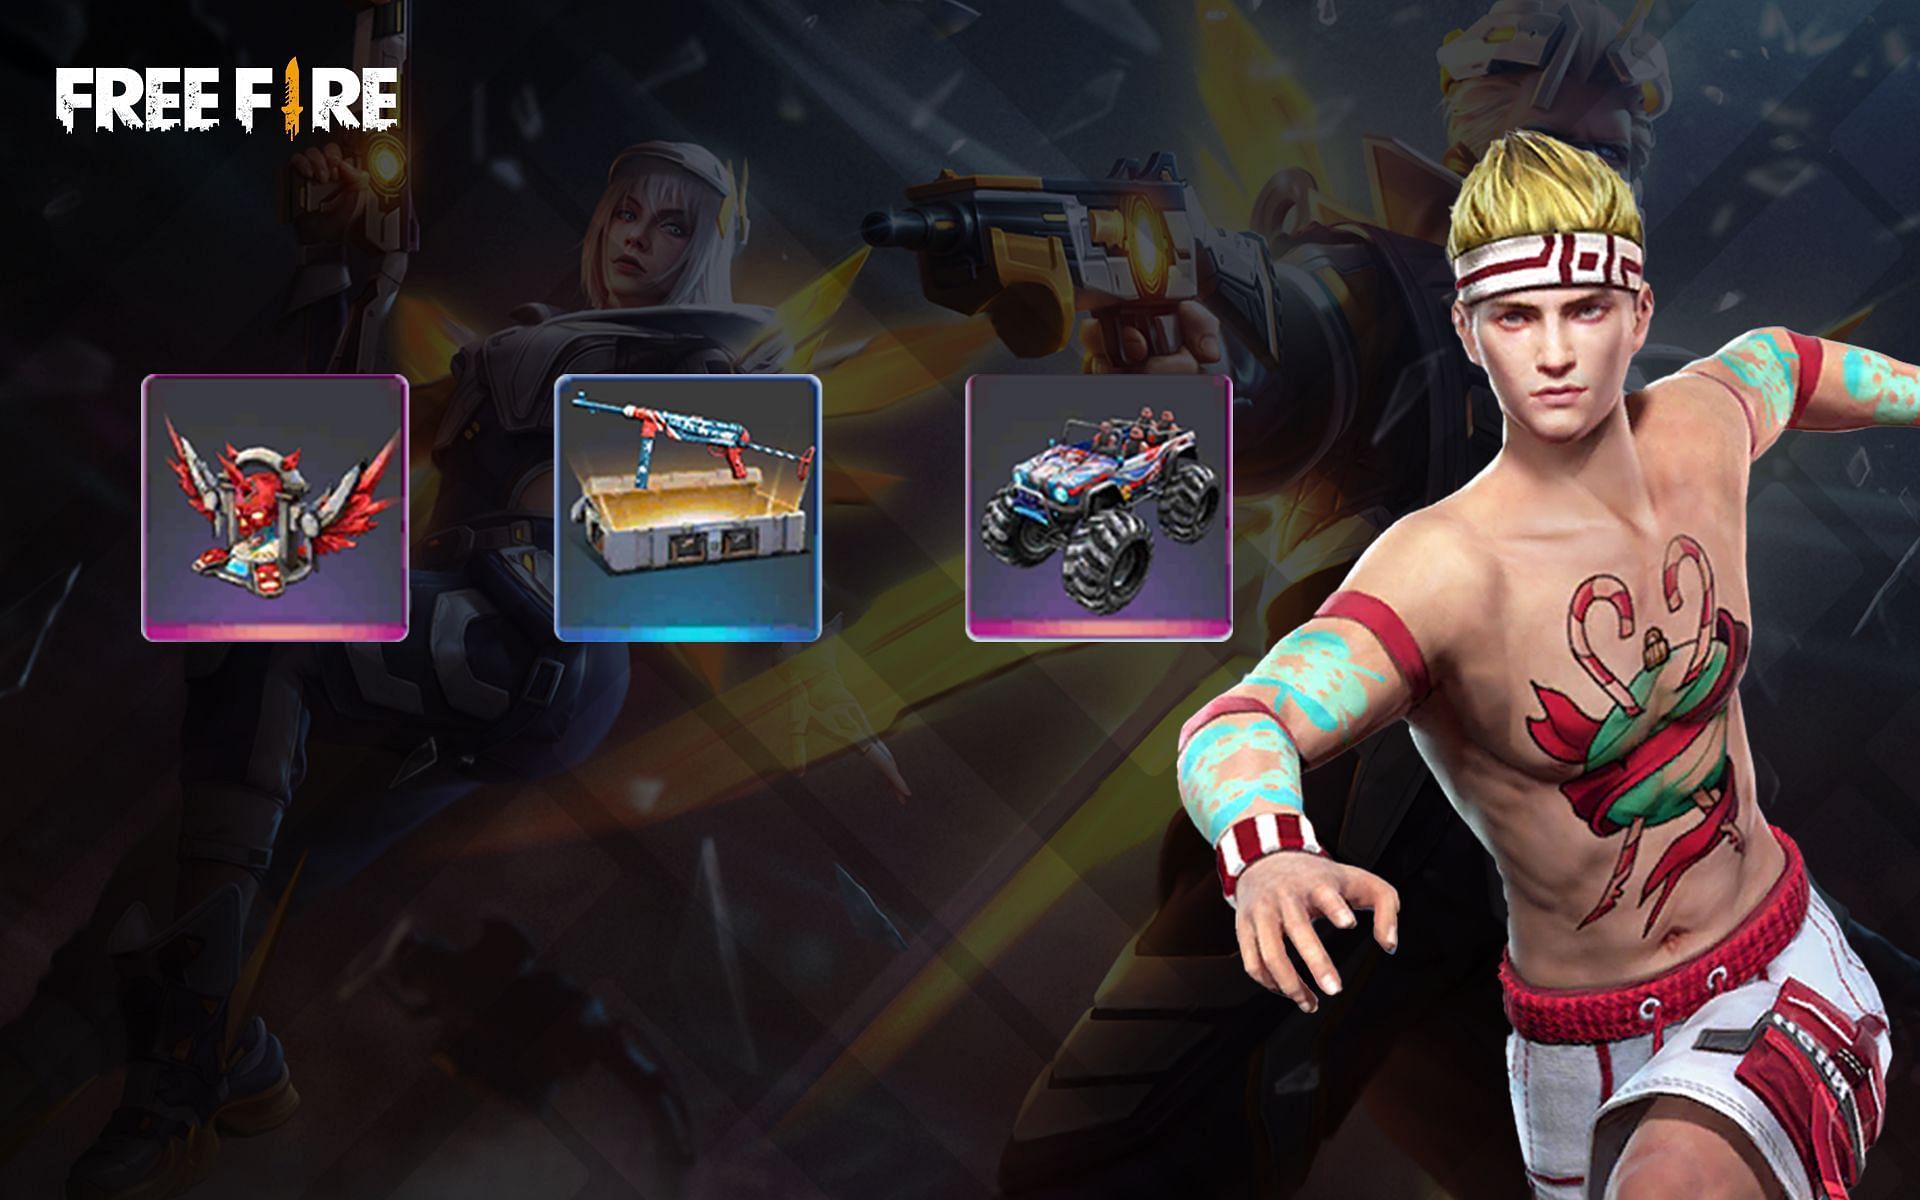 There are multiple rewards up for grabs (Image via Free Fire)